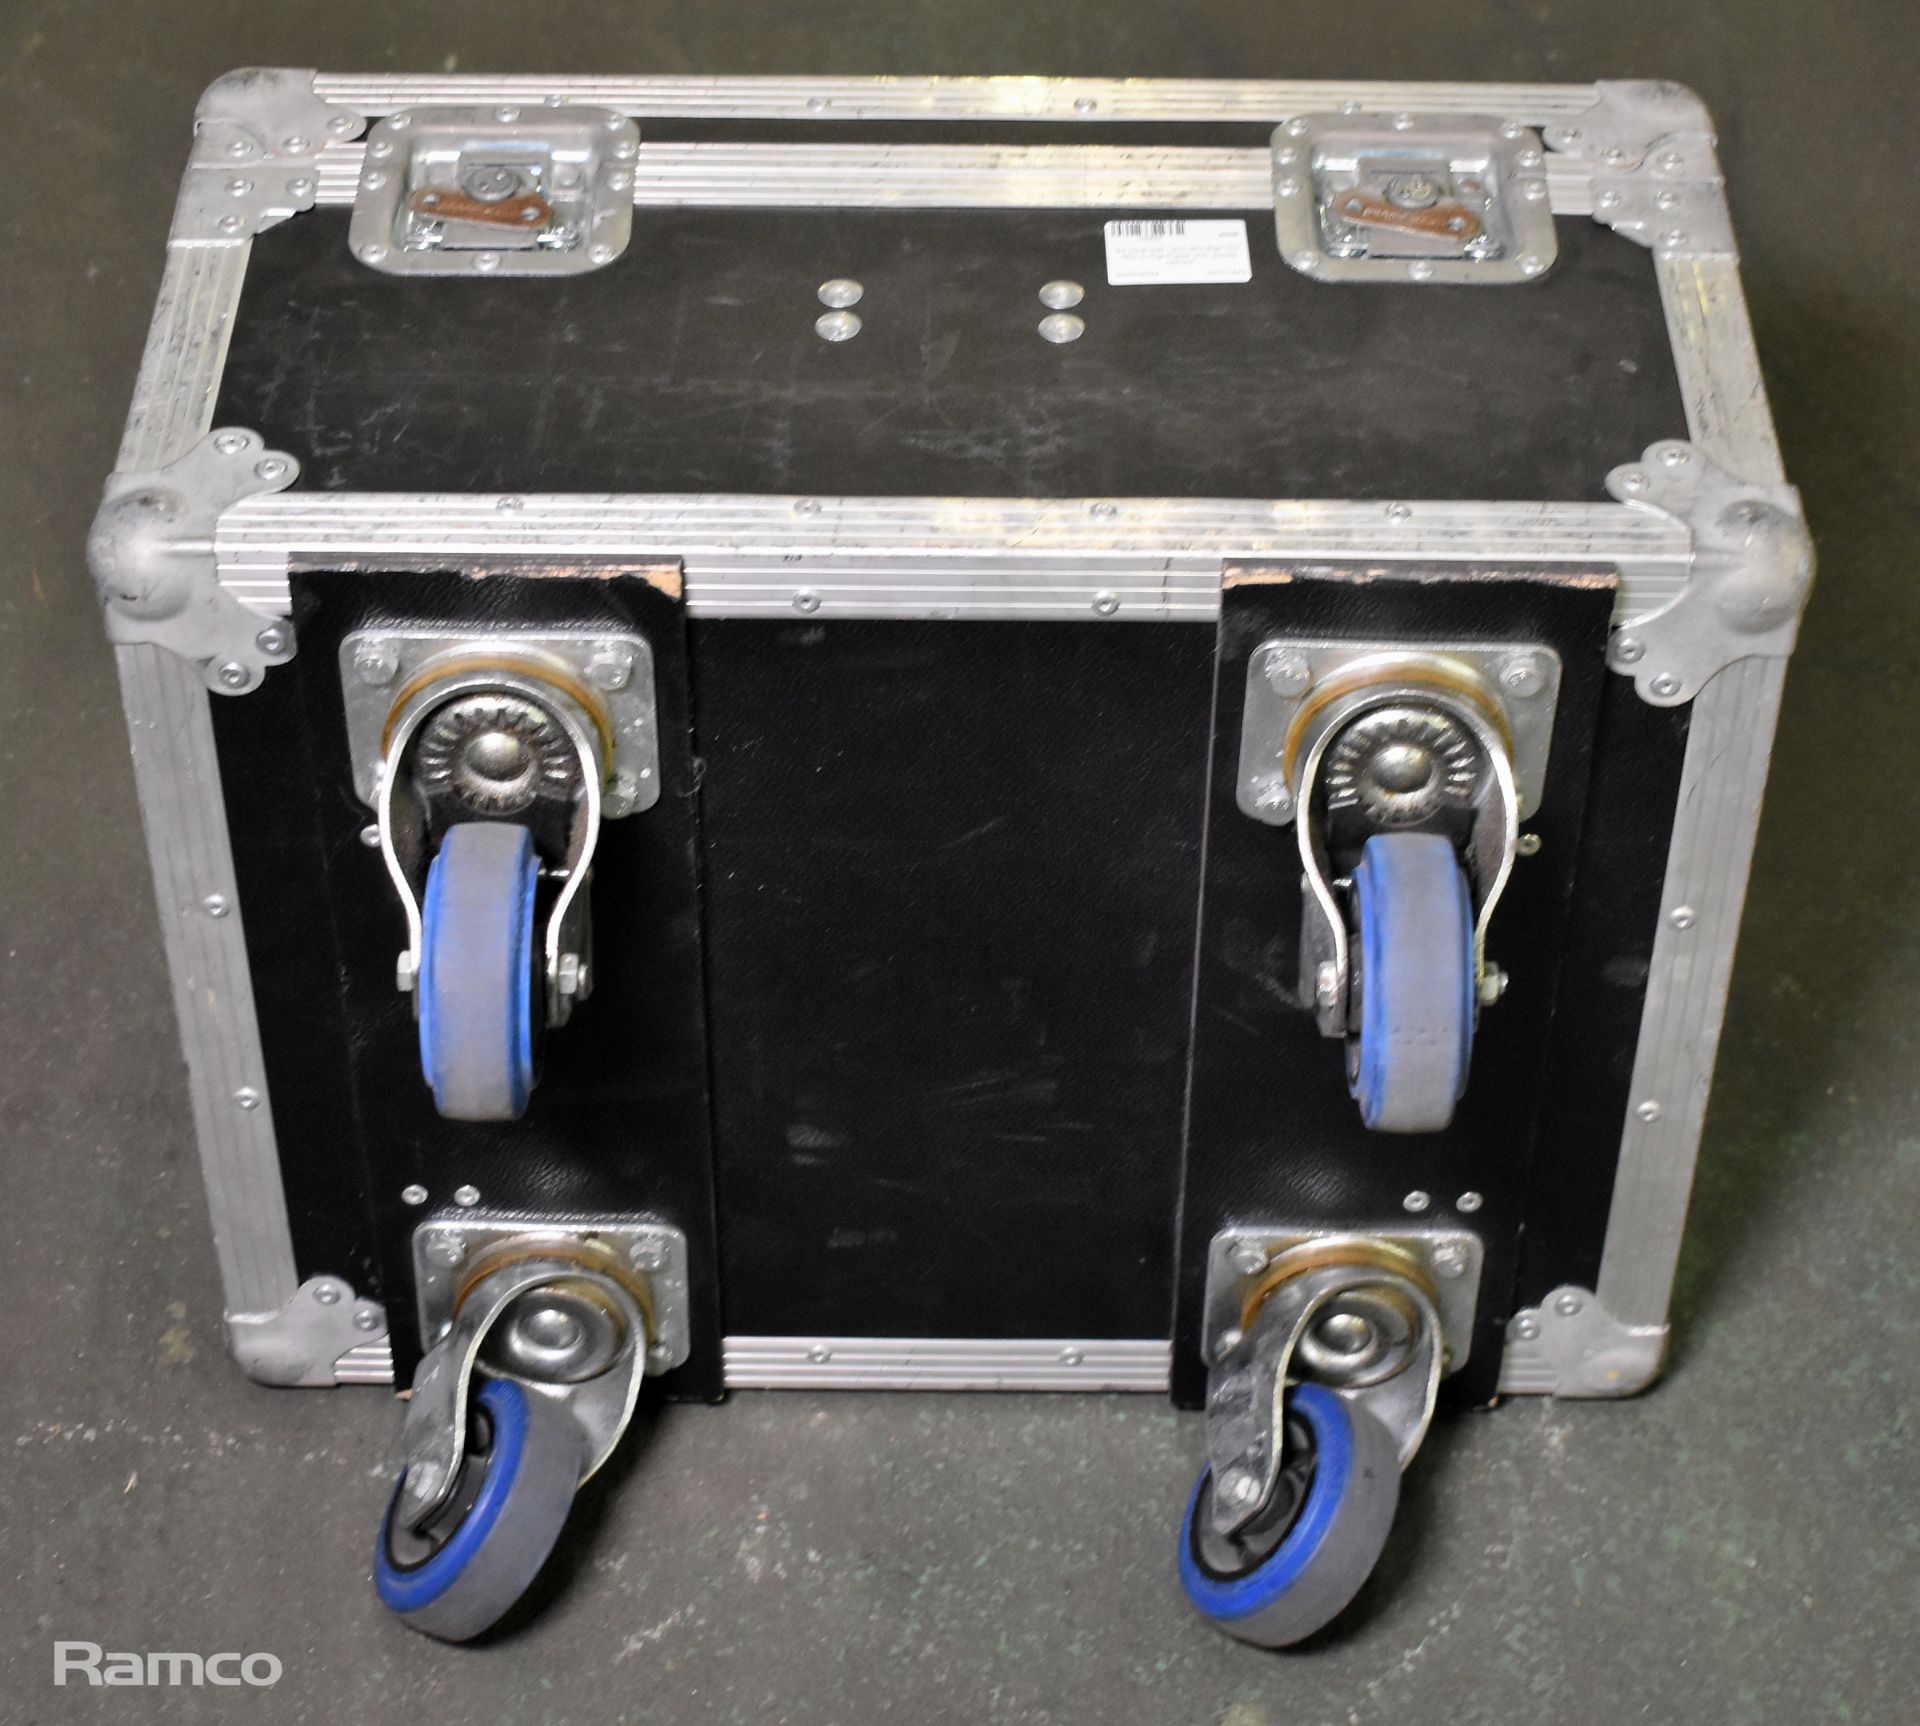 6x Chauvet LED SlimPar Tri7 IRC in flight case with power cables - Image 11 of 11